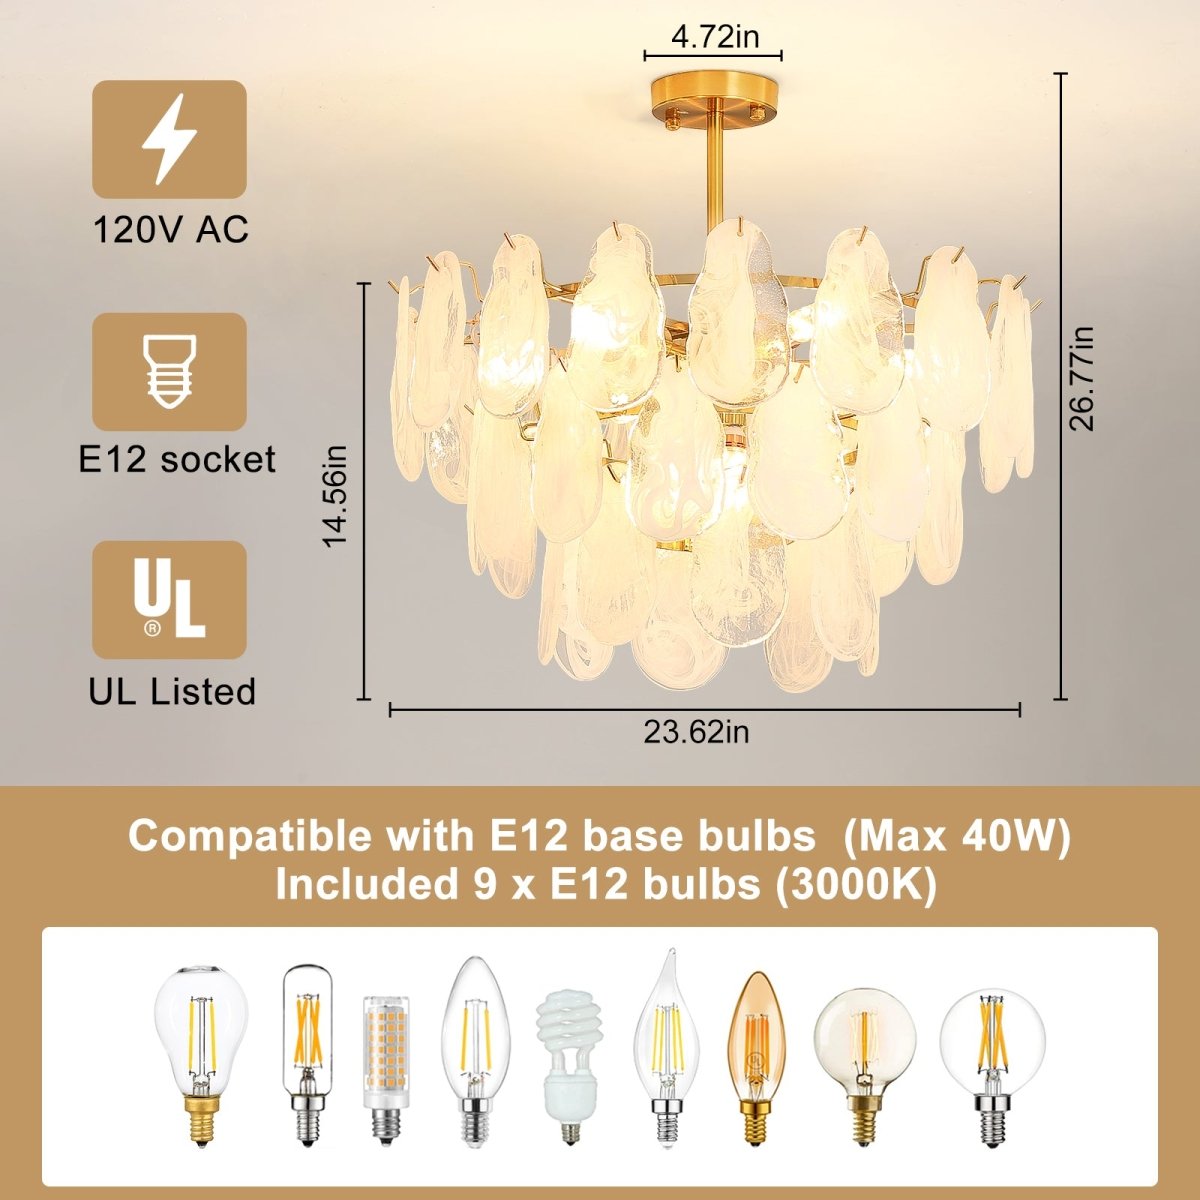 6-Light Modern Semi Flush Mount Ceiling Light, 20" Crystal Chandelier Ceiling Light Fixtures with 3-Tire Cloud Glass Lampshade for Bedroom, Included 6 LED Bulbs, UL Listed+ - WS-FPC53-D600-9C3 10 | DEPULEY